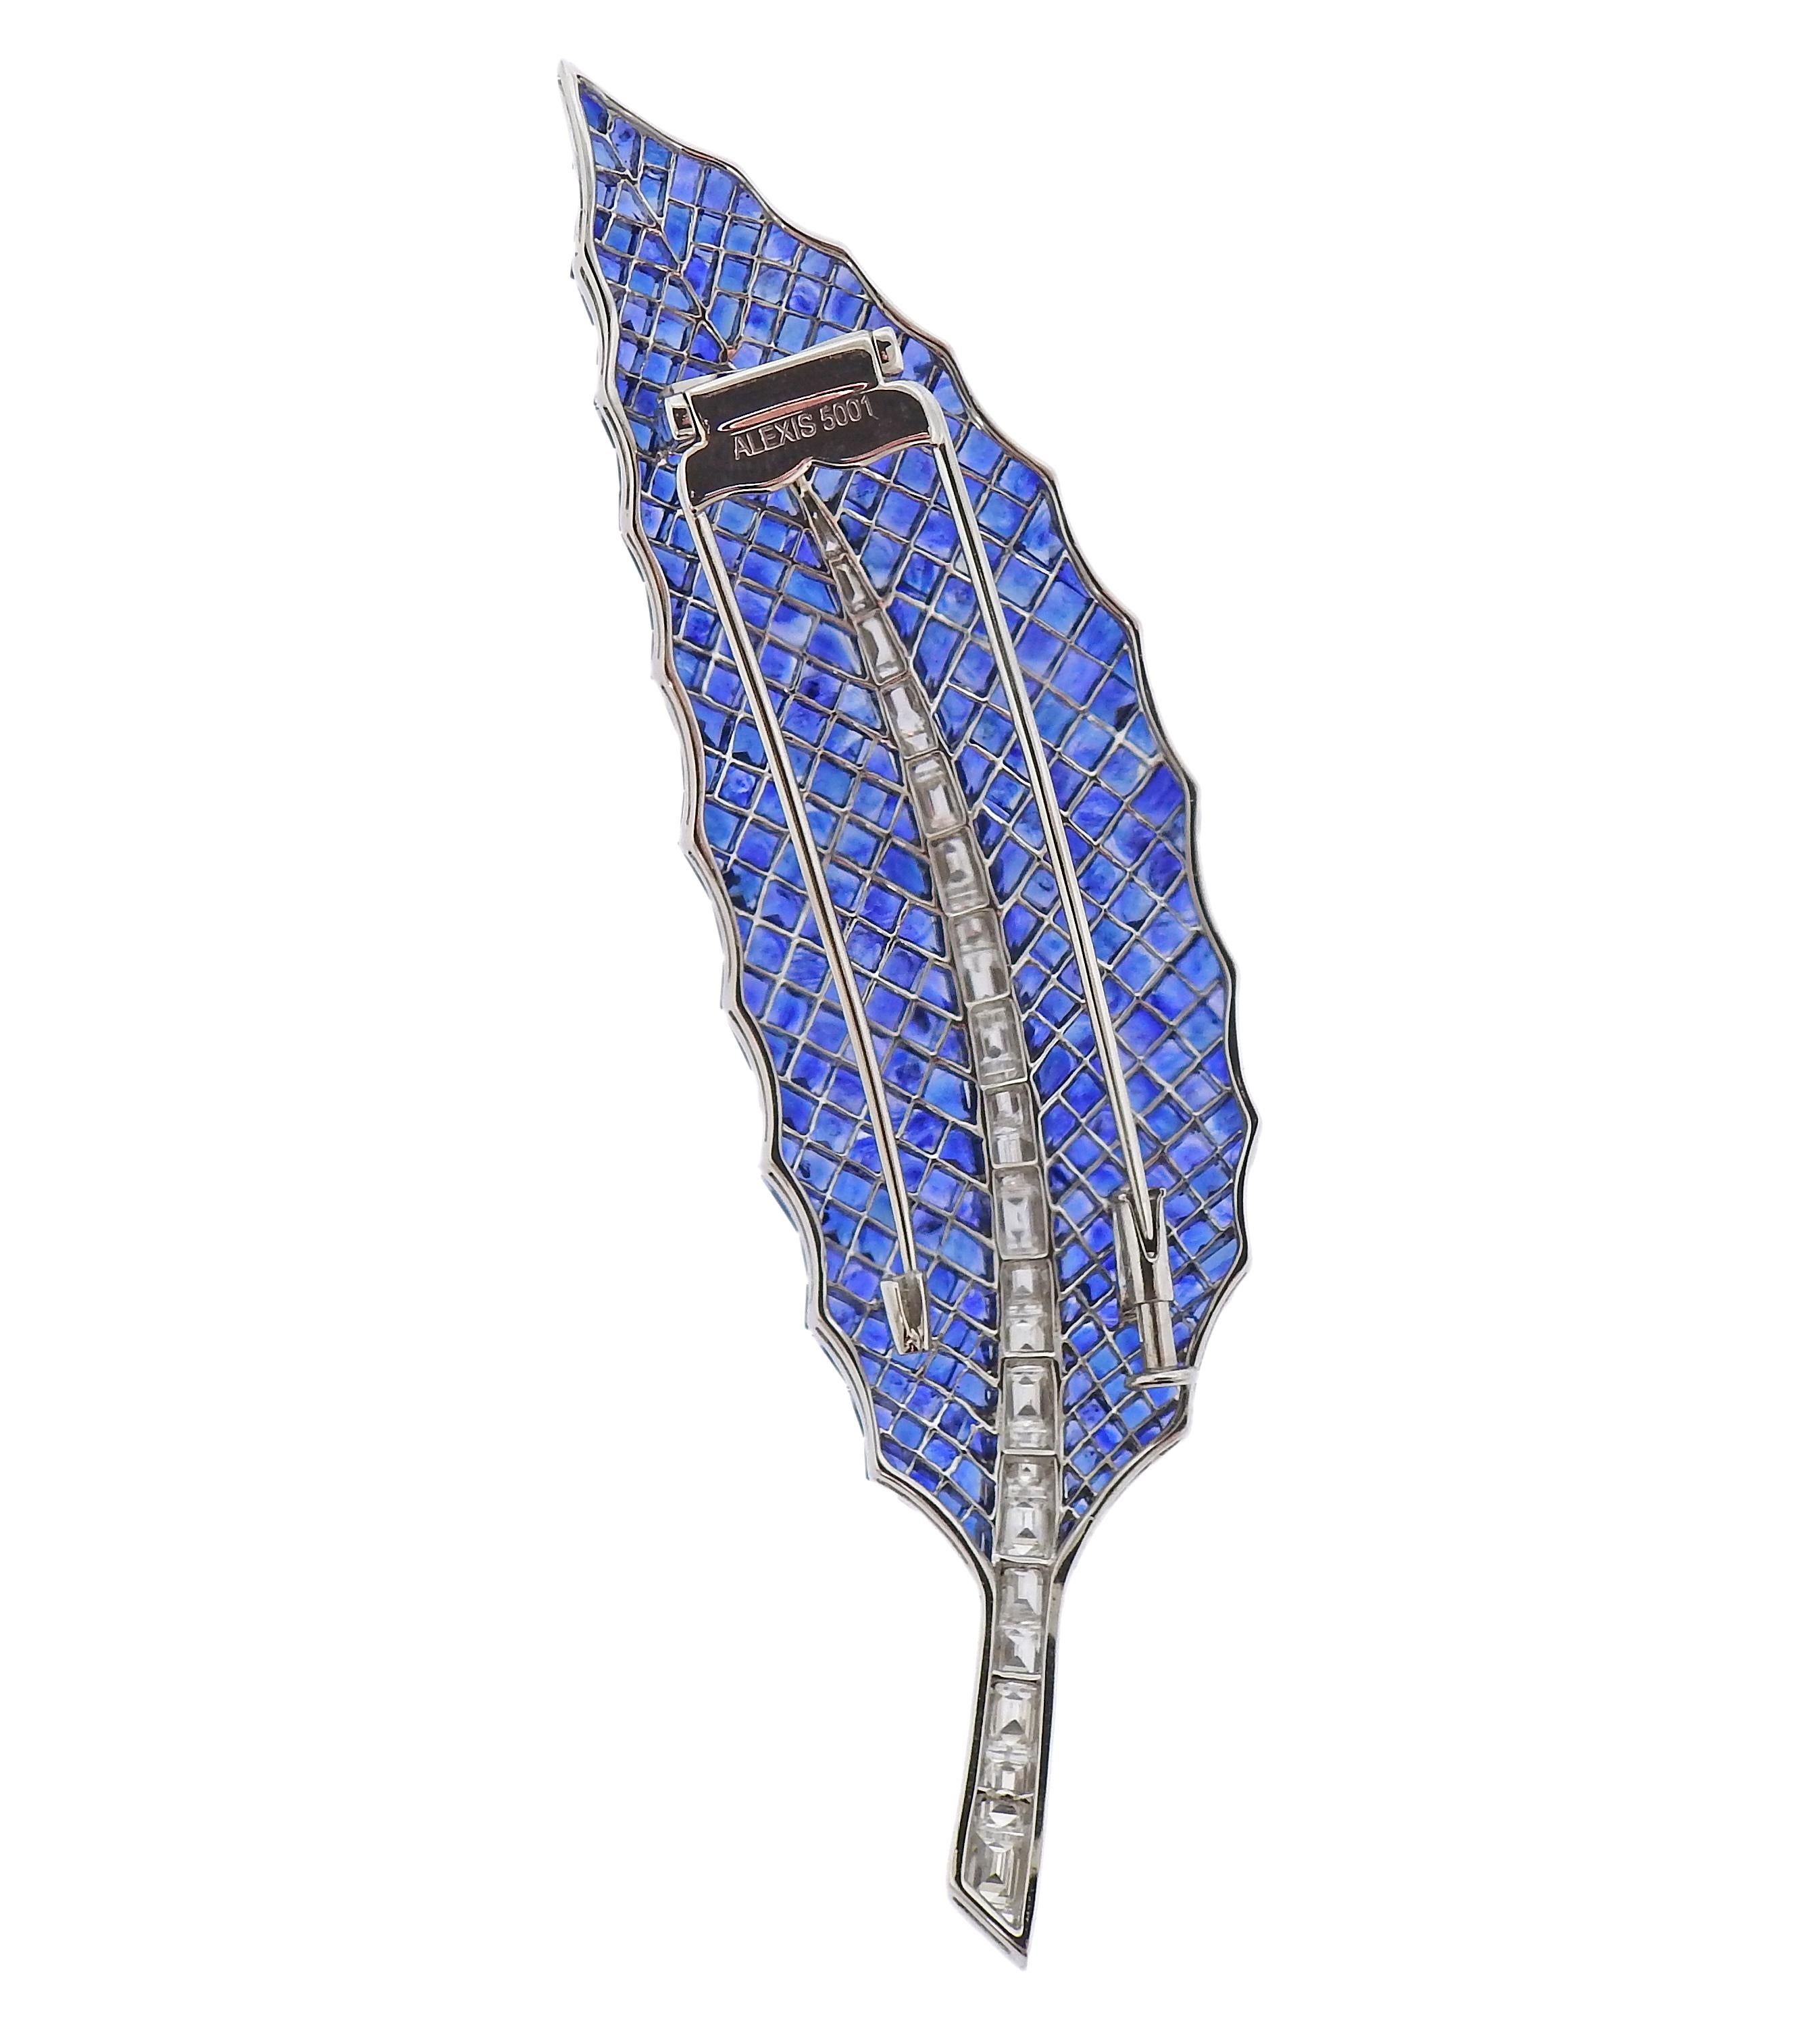 Exquisite 18k gold feather brooch by Alexis, with approx. 38-40cts in blue invisible set sapphires and 2.06ctw in diamonds. Brooch measures 3.75